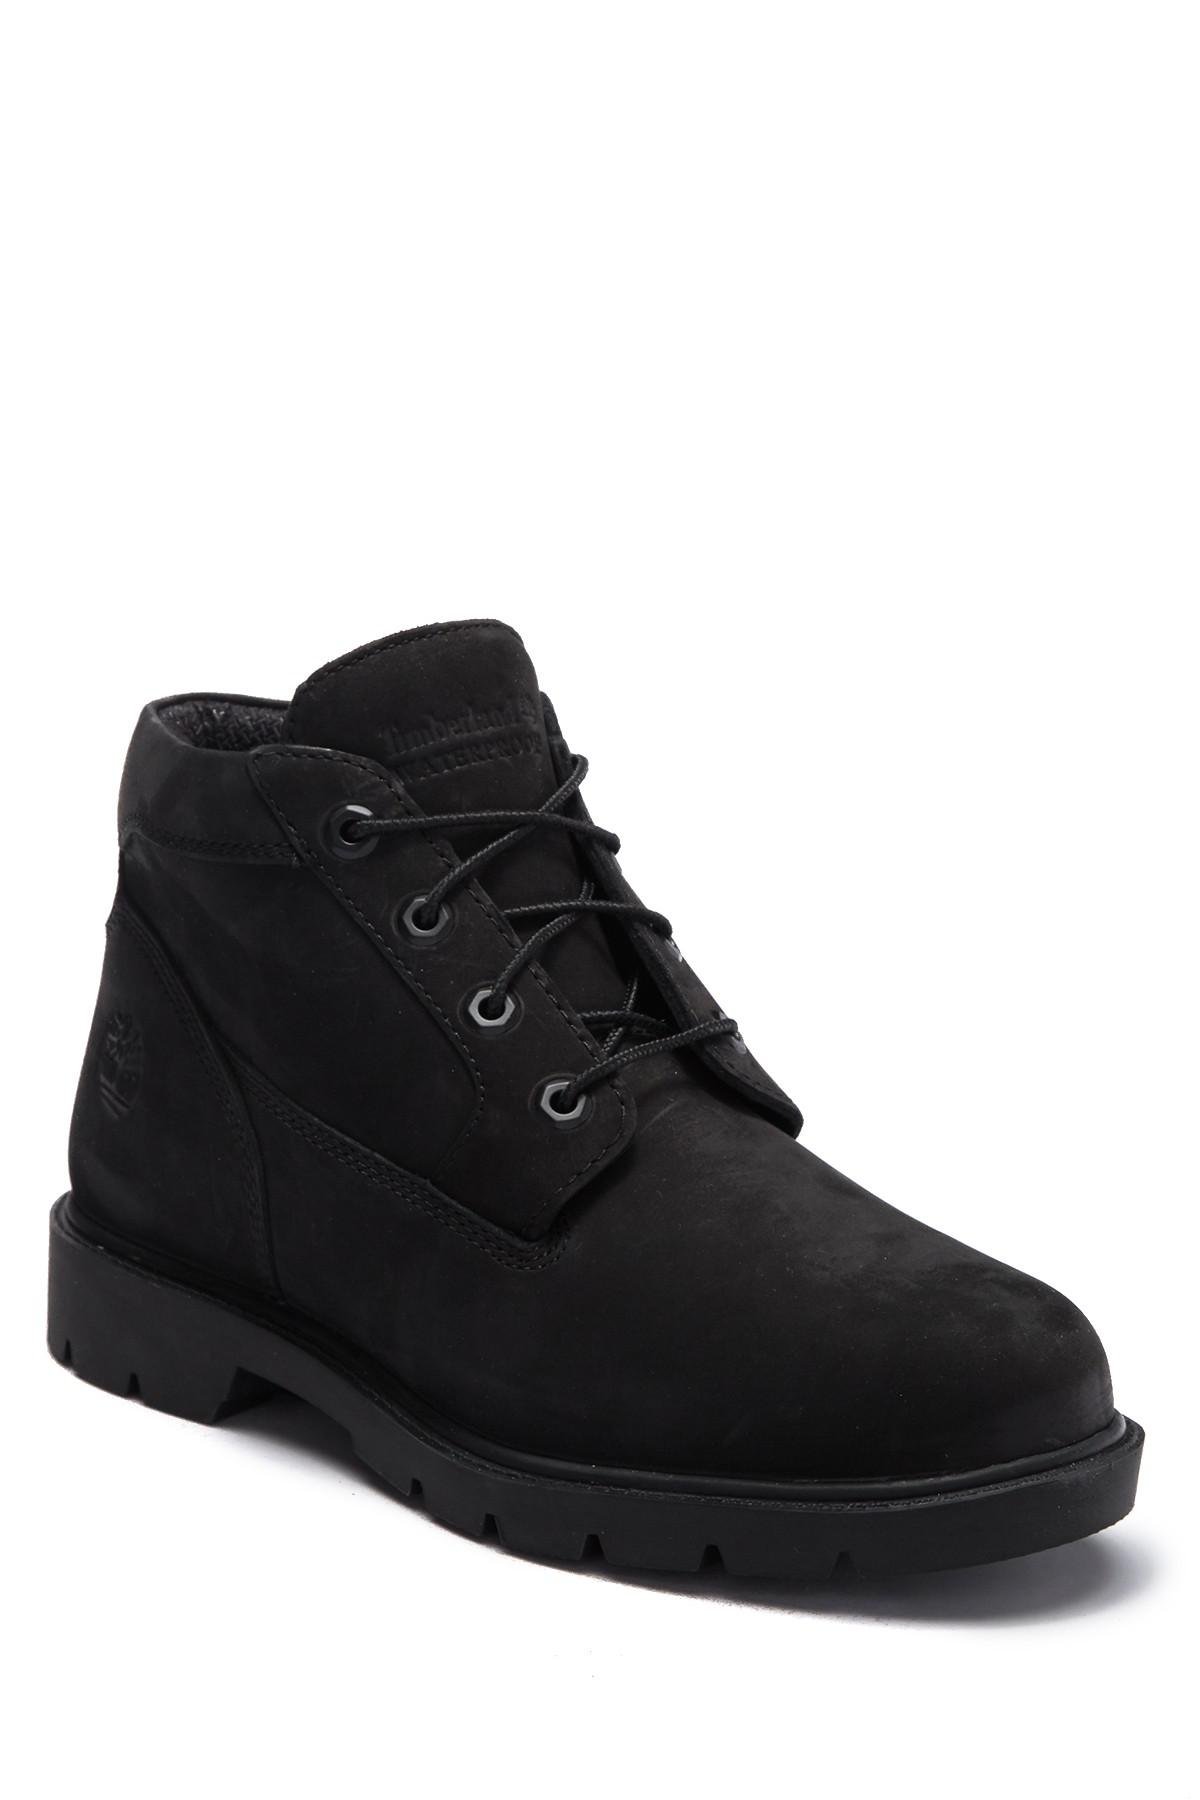 Lionel Green Street he equivocado no Timberland Value Suede Chukka Boot - Wide Width Available in Black for Men  | Lyst